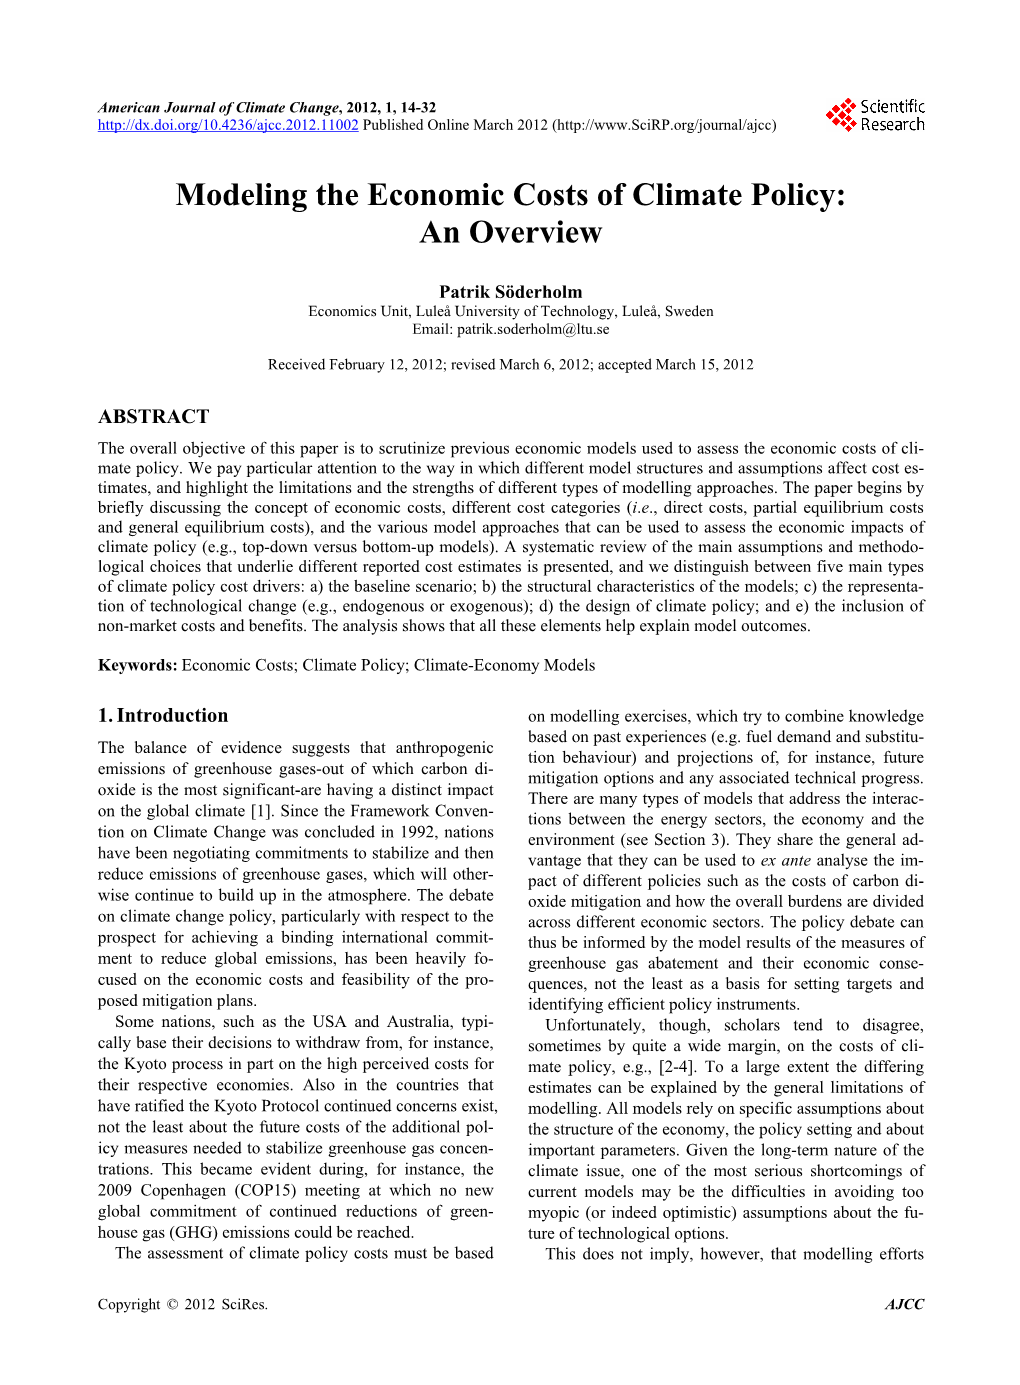 Modeling the Economic Costs of Climate Policy: an Overview